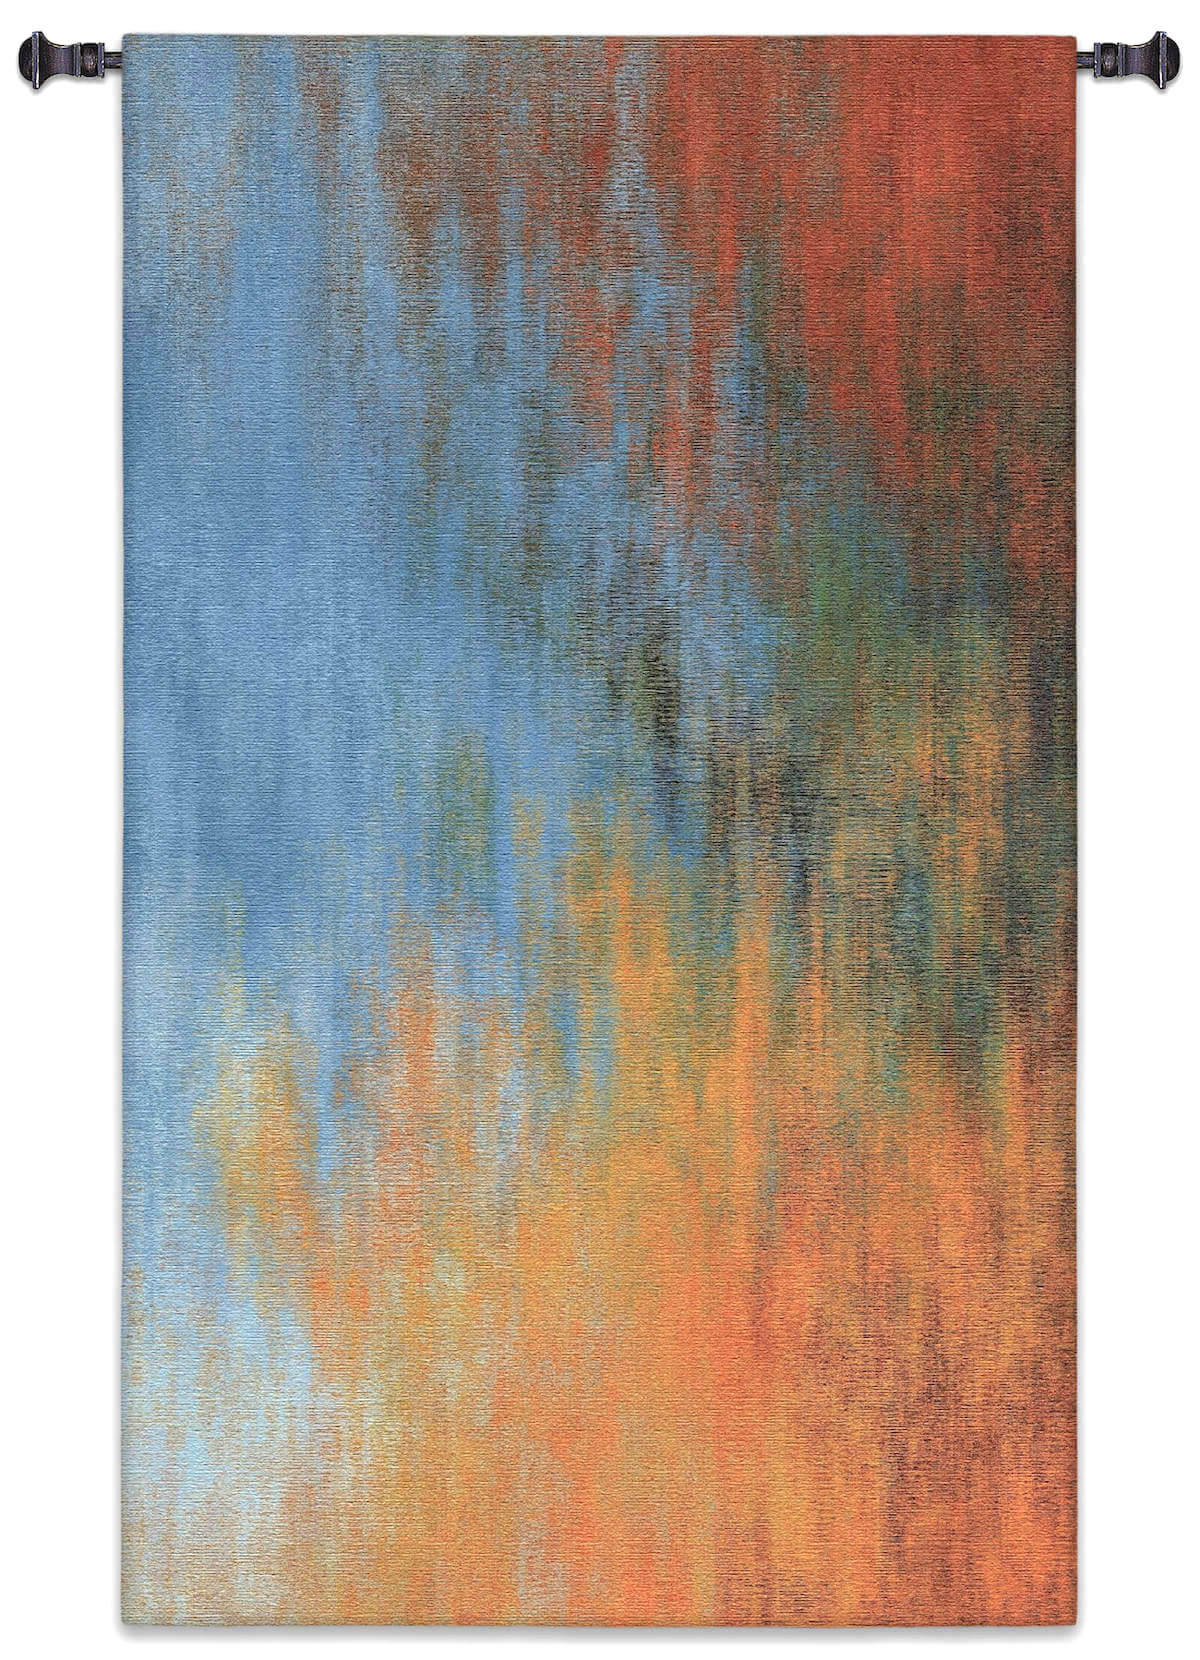 Continuum Vertical Wall Tapestry abstract, colorful, red, blue, orange, Valiance Vertical Wall Tapestry, Continuum